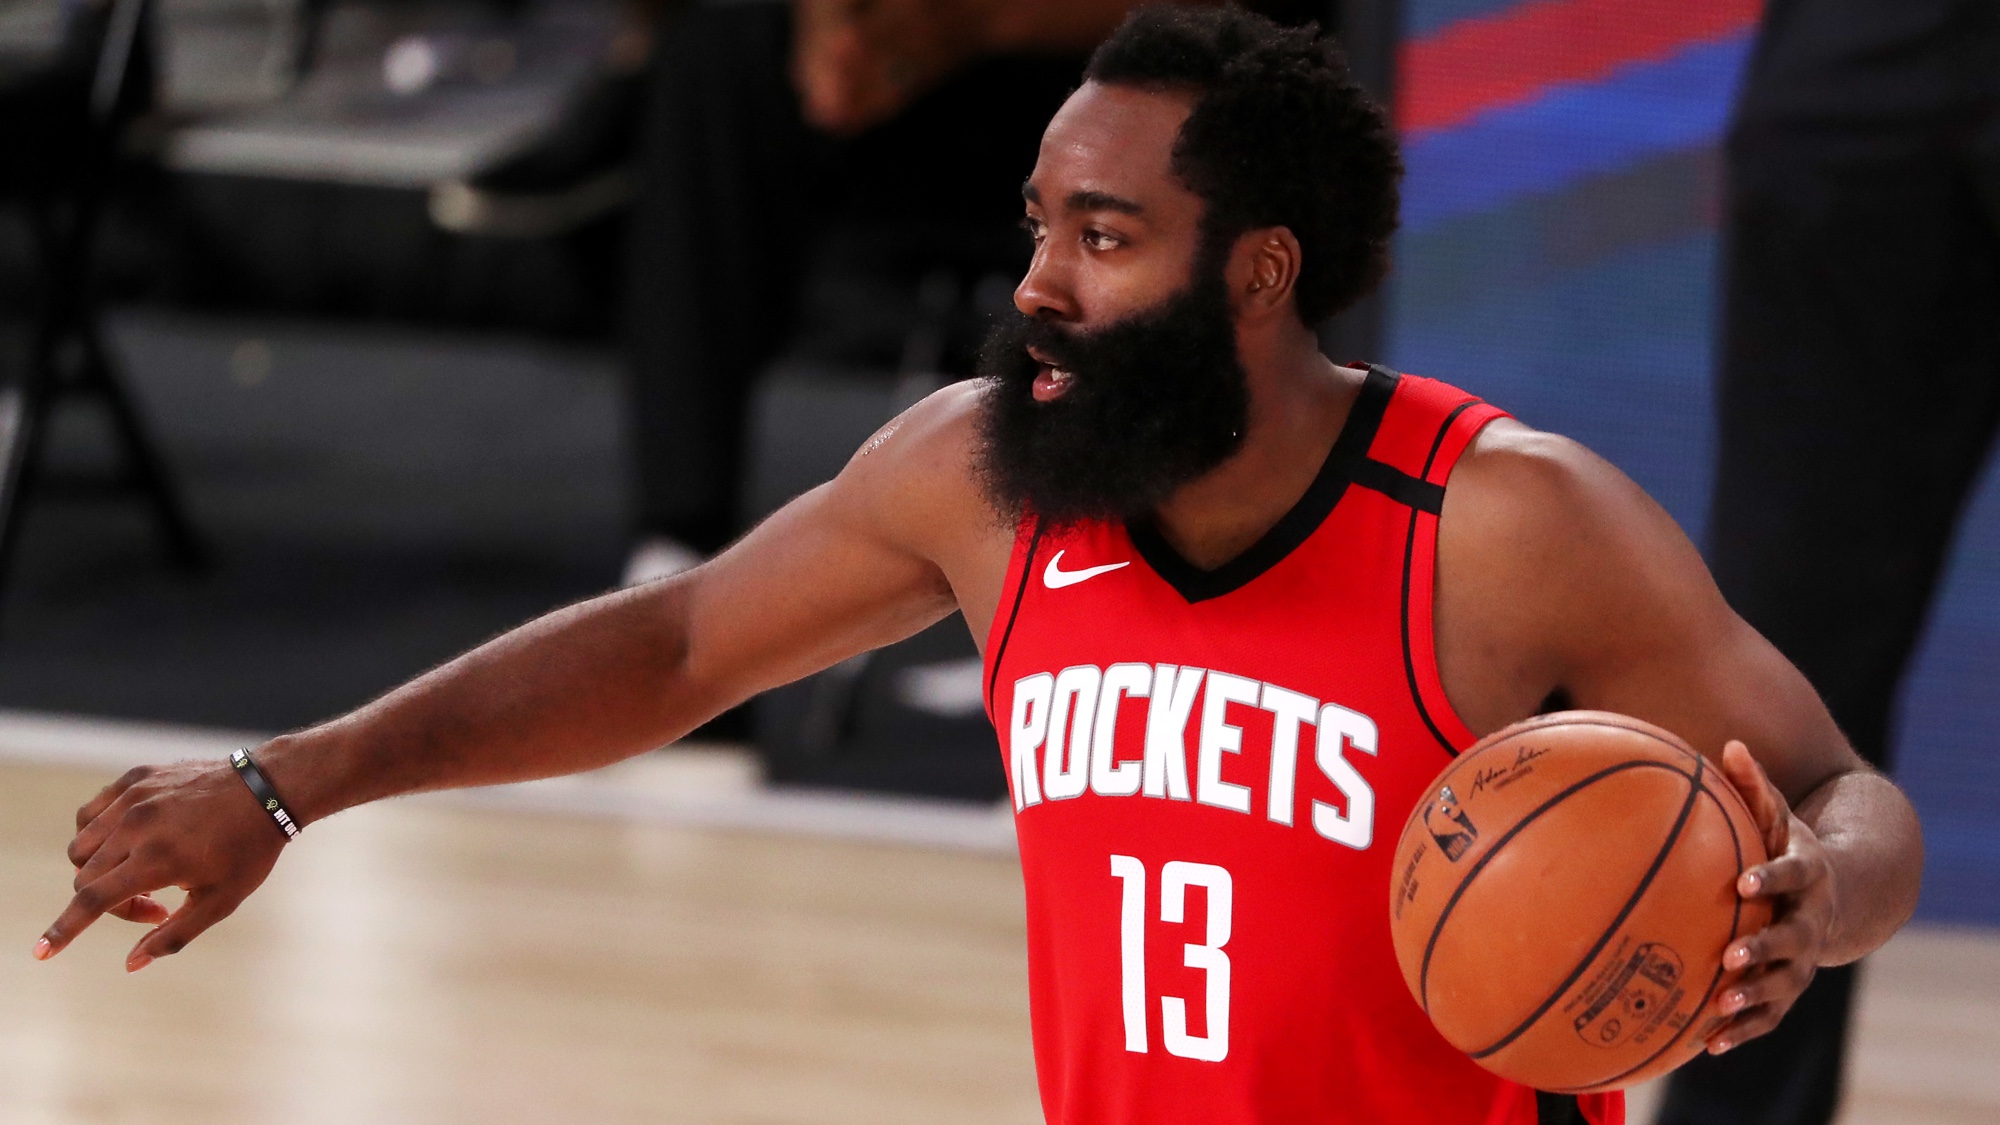 Lakers vs Rockets live stream How to watch 2020 NBA seeding game online Toms Guide